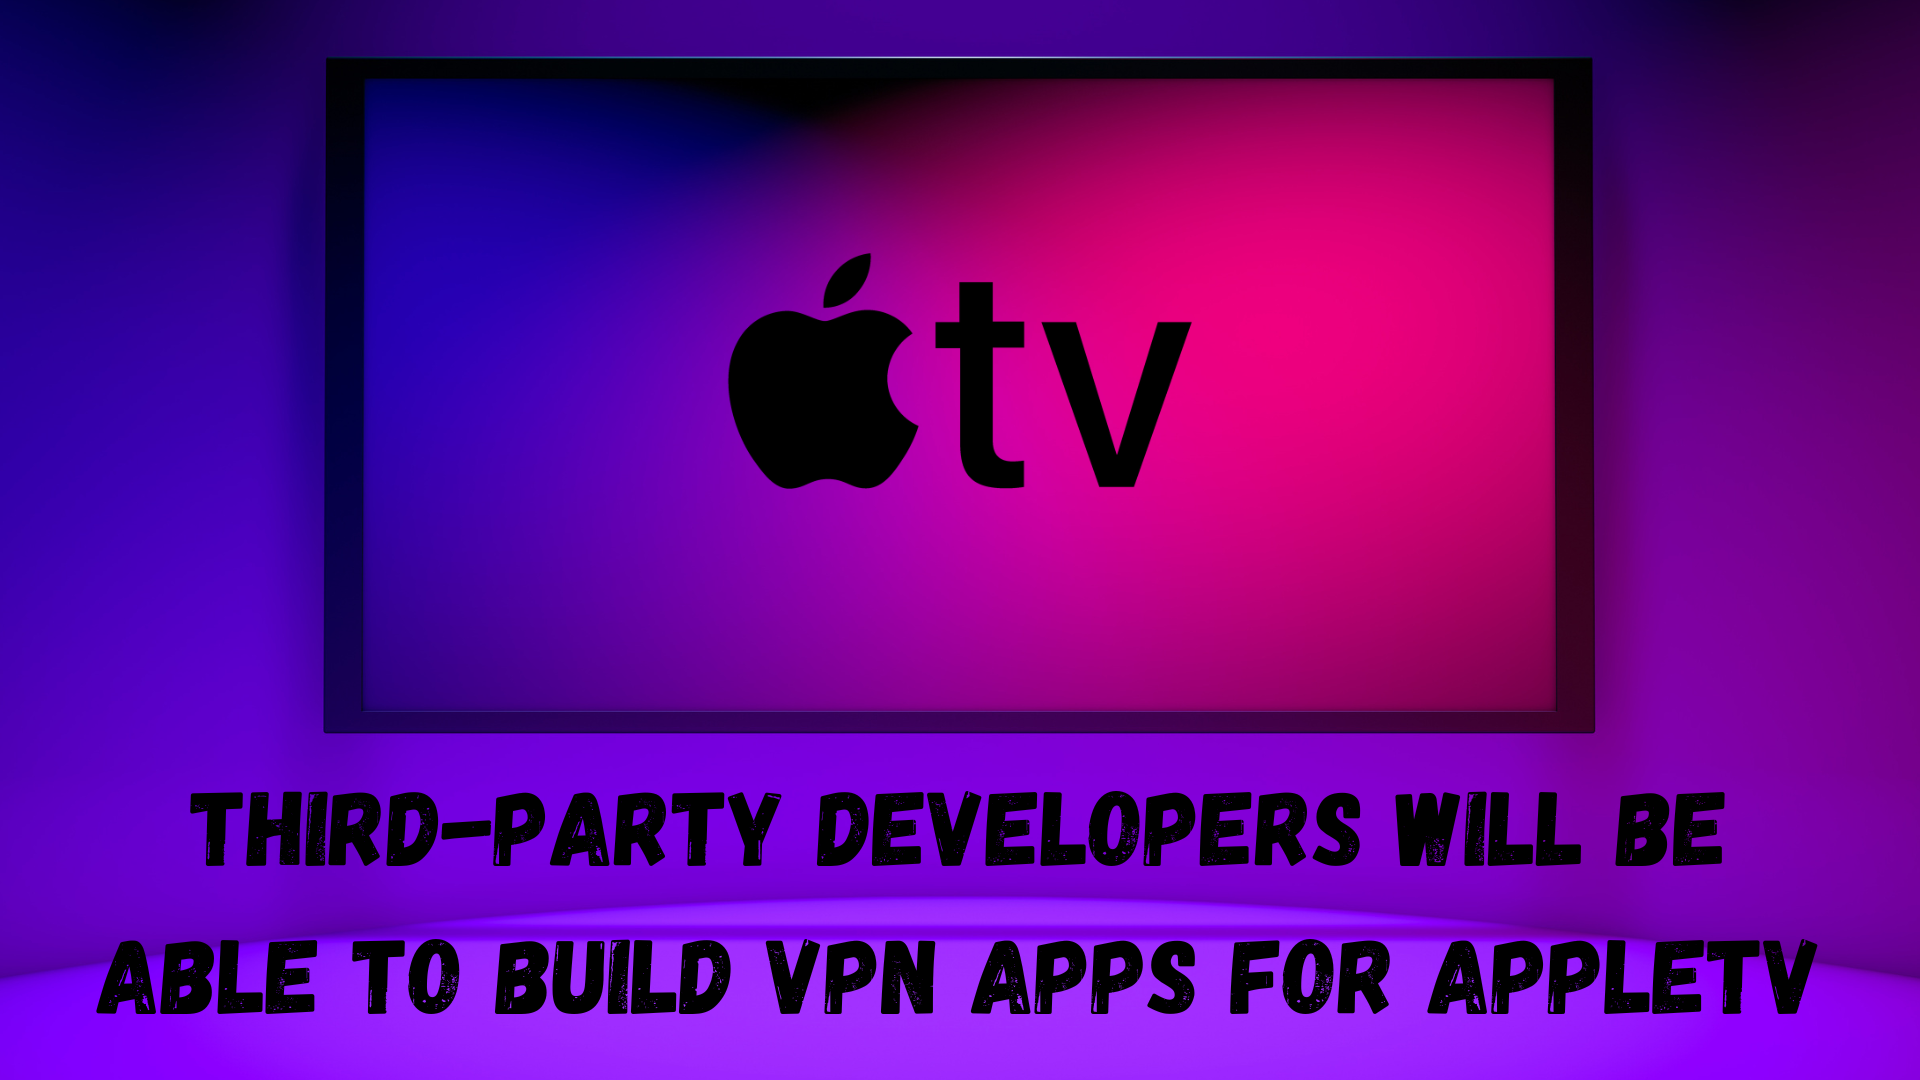 third-party developers will be able to build vpn apps for appletv